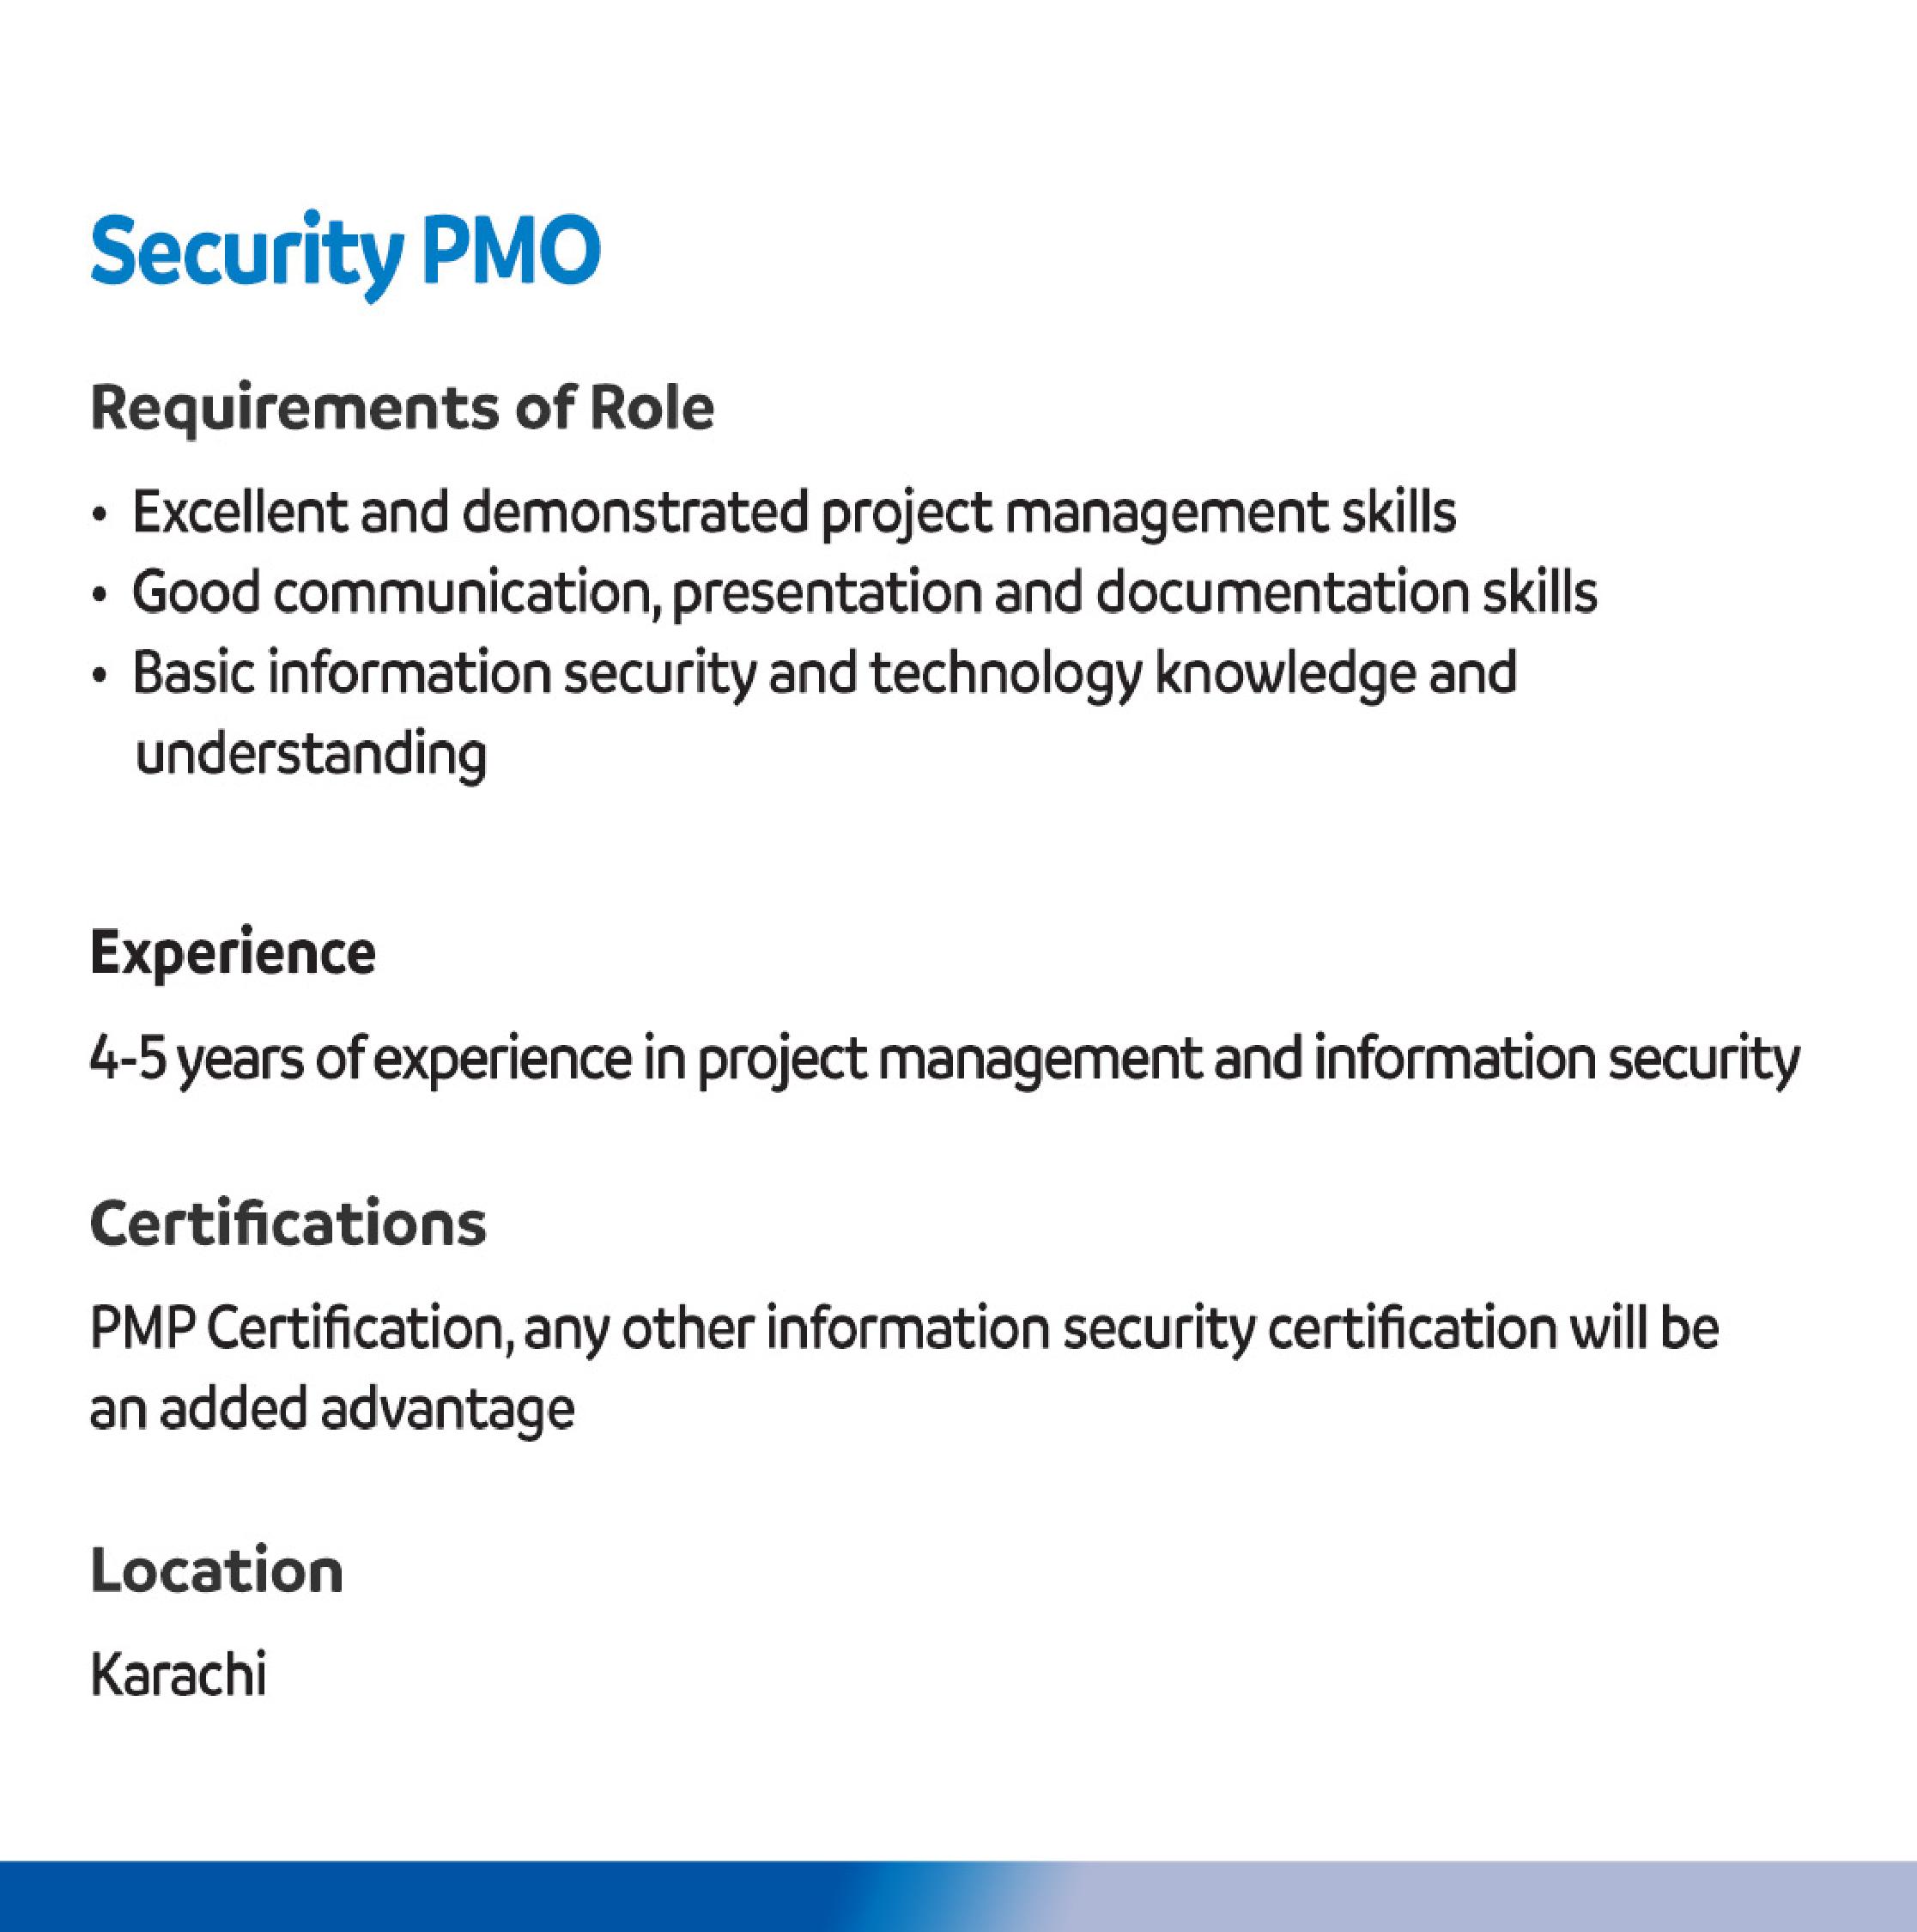 United Bank Limited (UBL) is hiring Information Security Professionals.